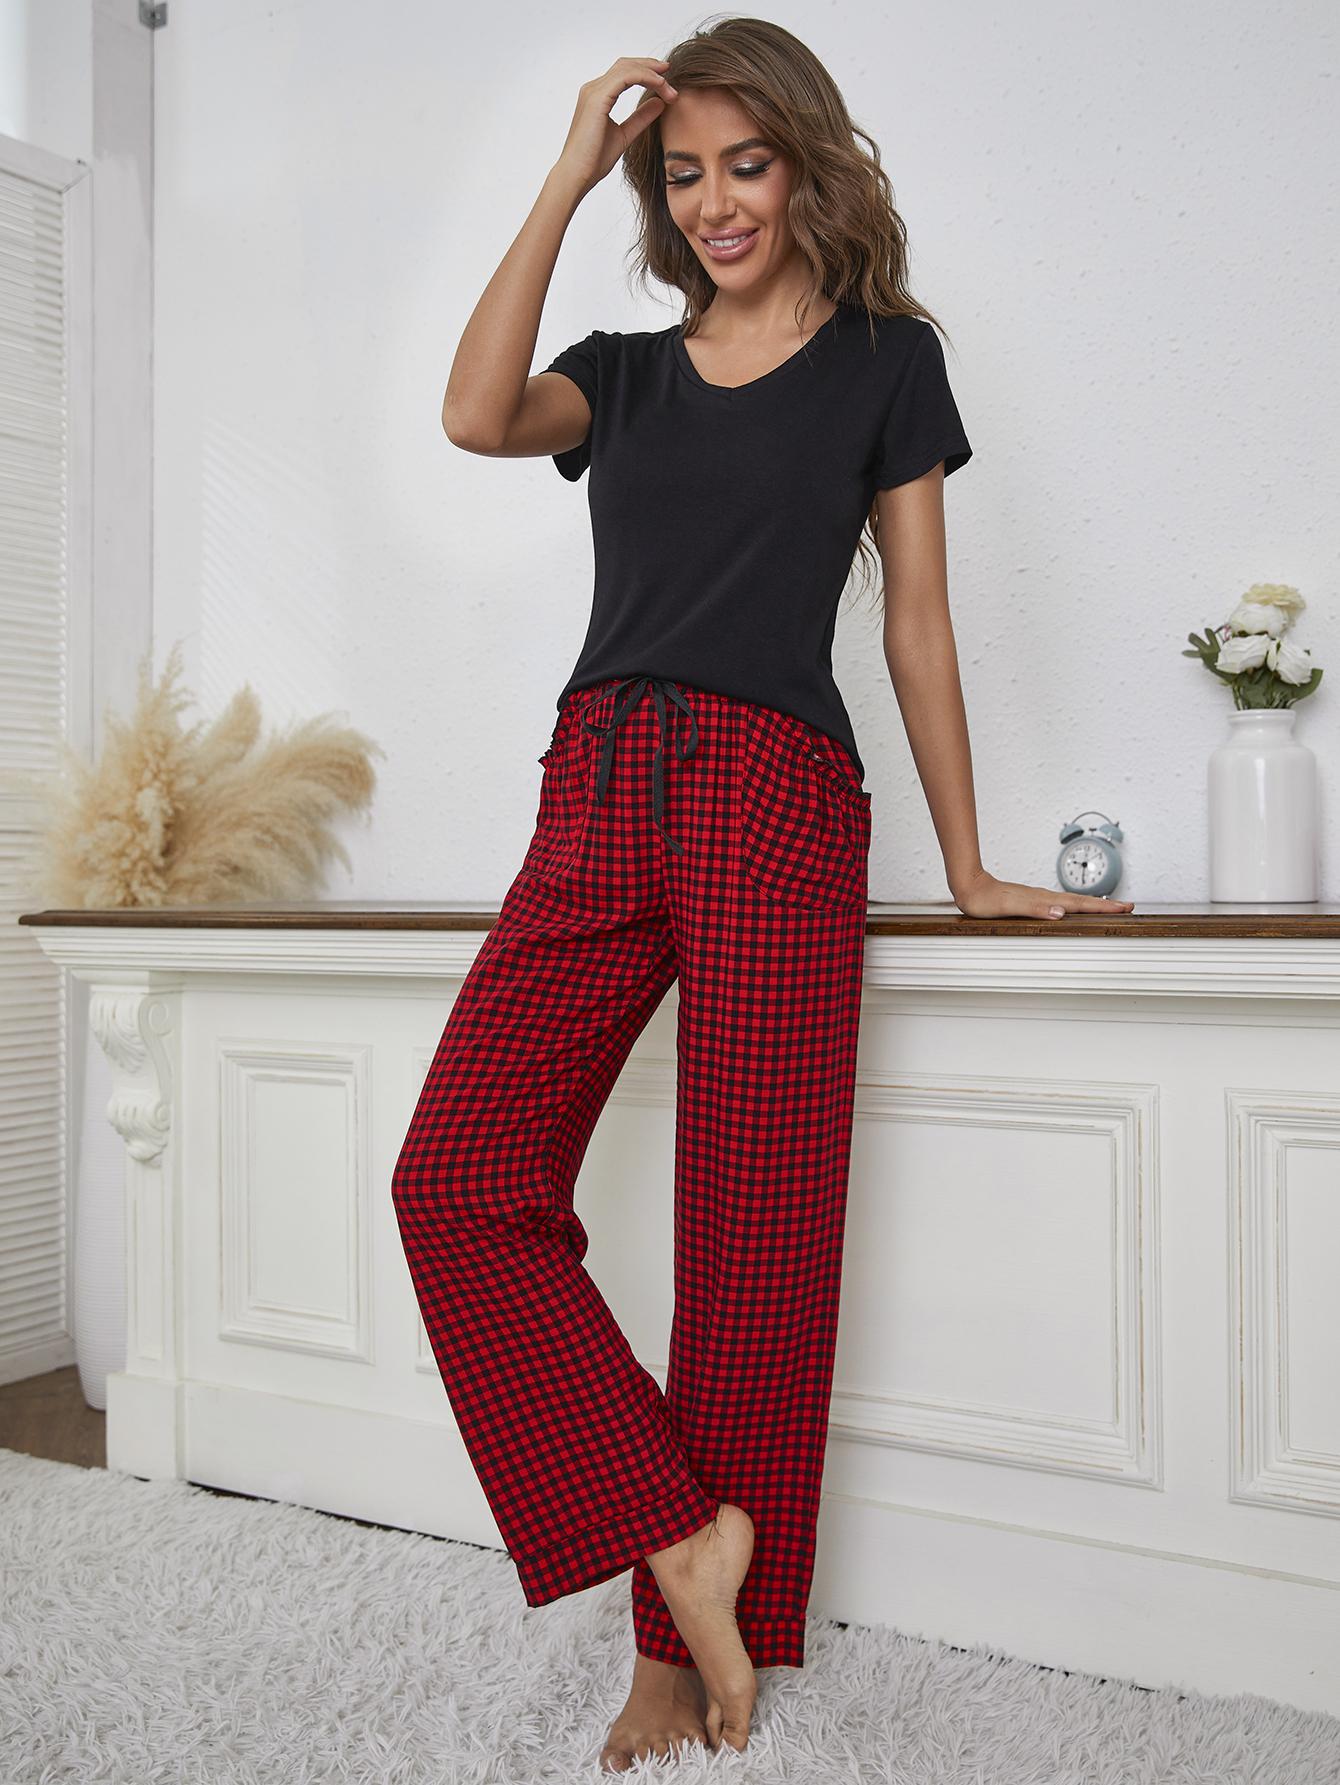 V-Neck Top and Gingham Pants Lounge Set  | KIKI COUTURE-Women's Clothing, Designer Fashions, Shoes, Bags